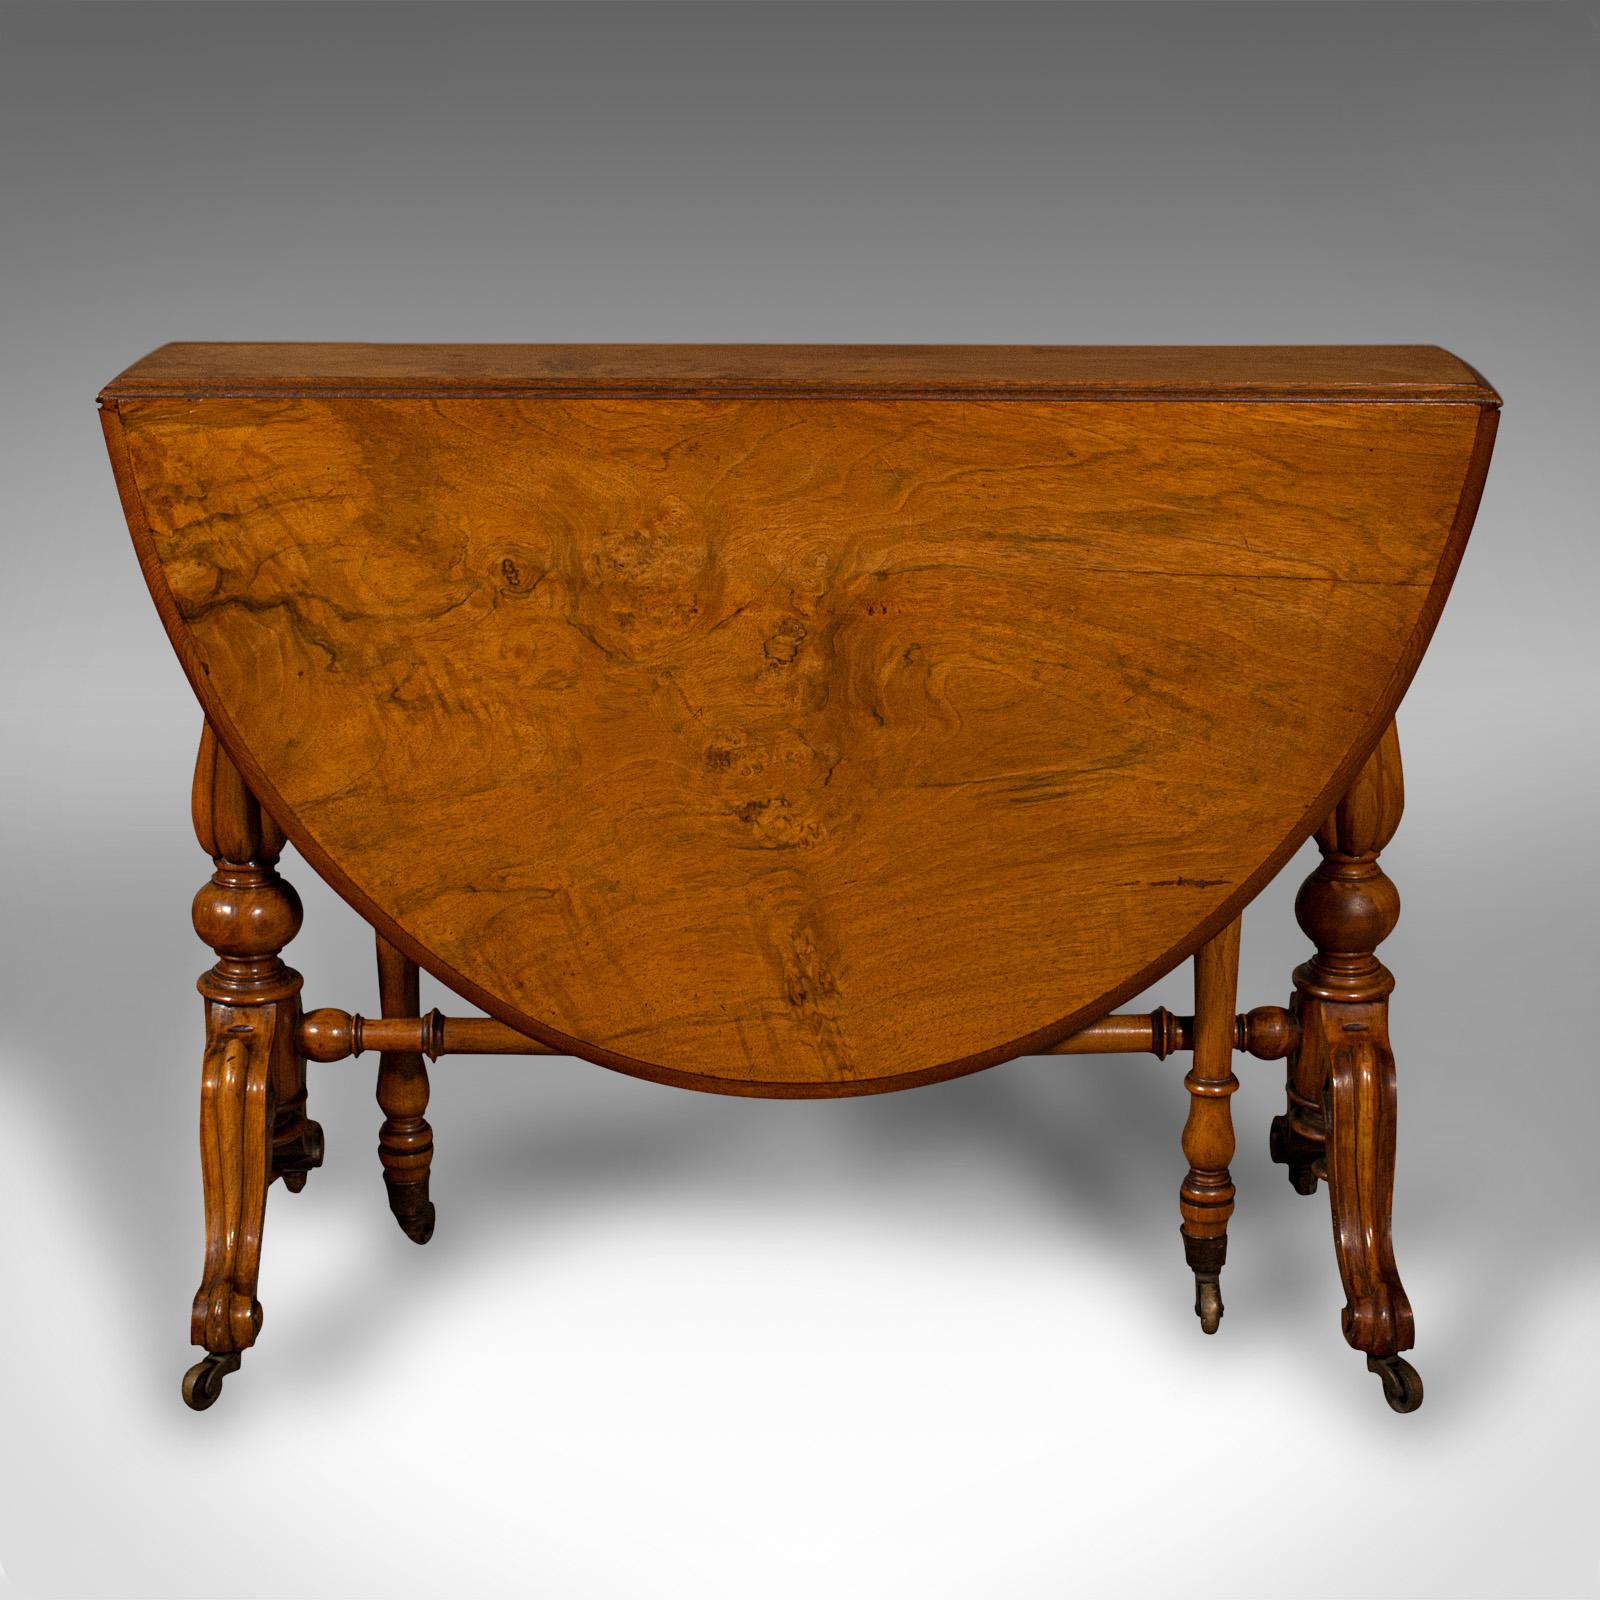 British Antique Sutherland Table, English, Burr Walnut, Oval, Occasional, Victorian For Sale